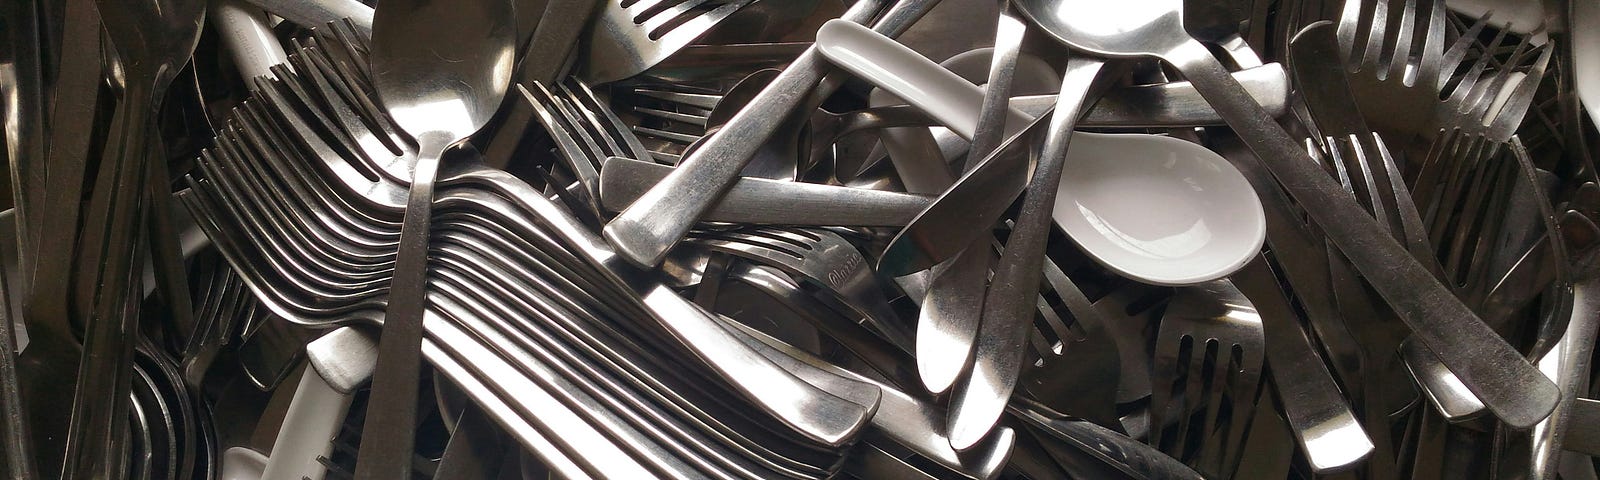 A haphazard collection of assorted cutlery, including plastic soup spoons and metal spoons and forks